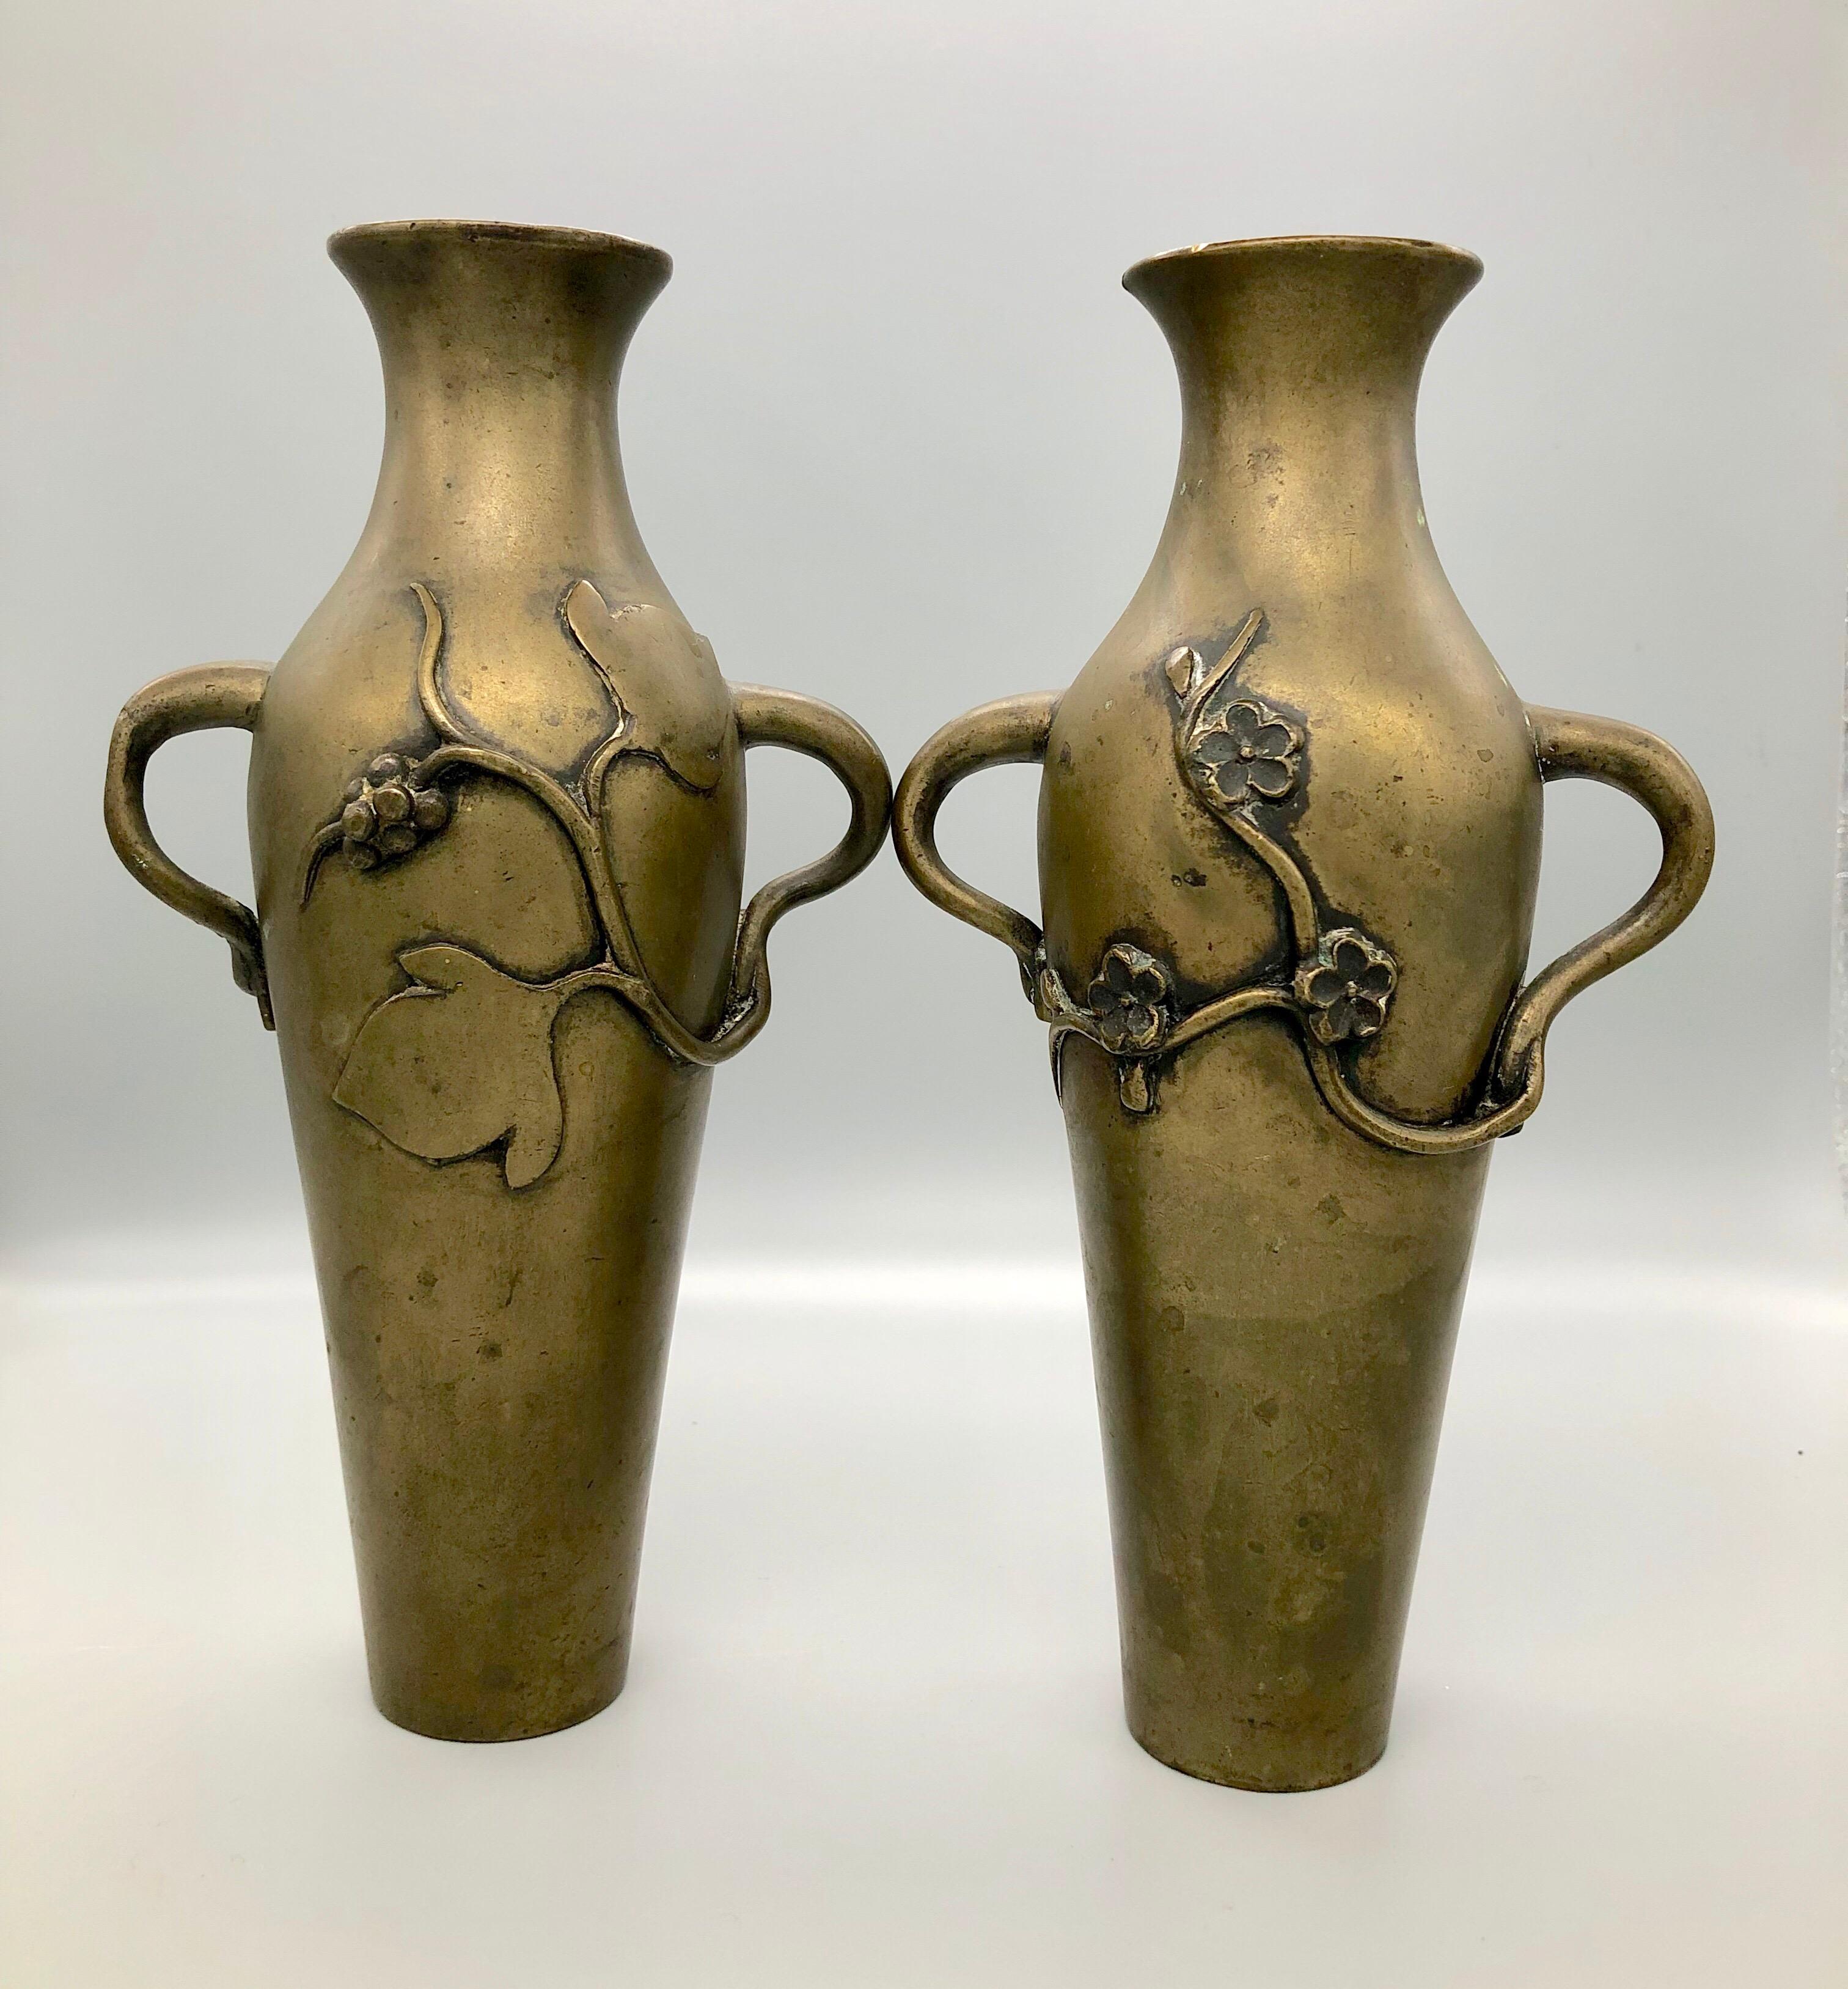 Pair of Handmade Meiji Era Bronze Art Nouveau Vases, Flowers and Grapevine In Good Condition For Sale In Vineyard Haven, MA